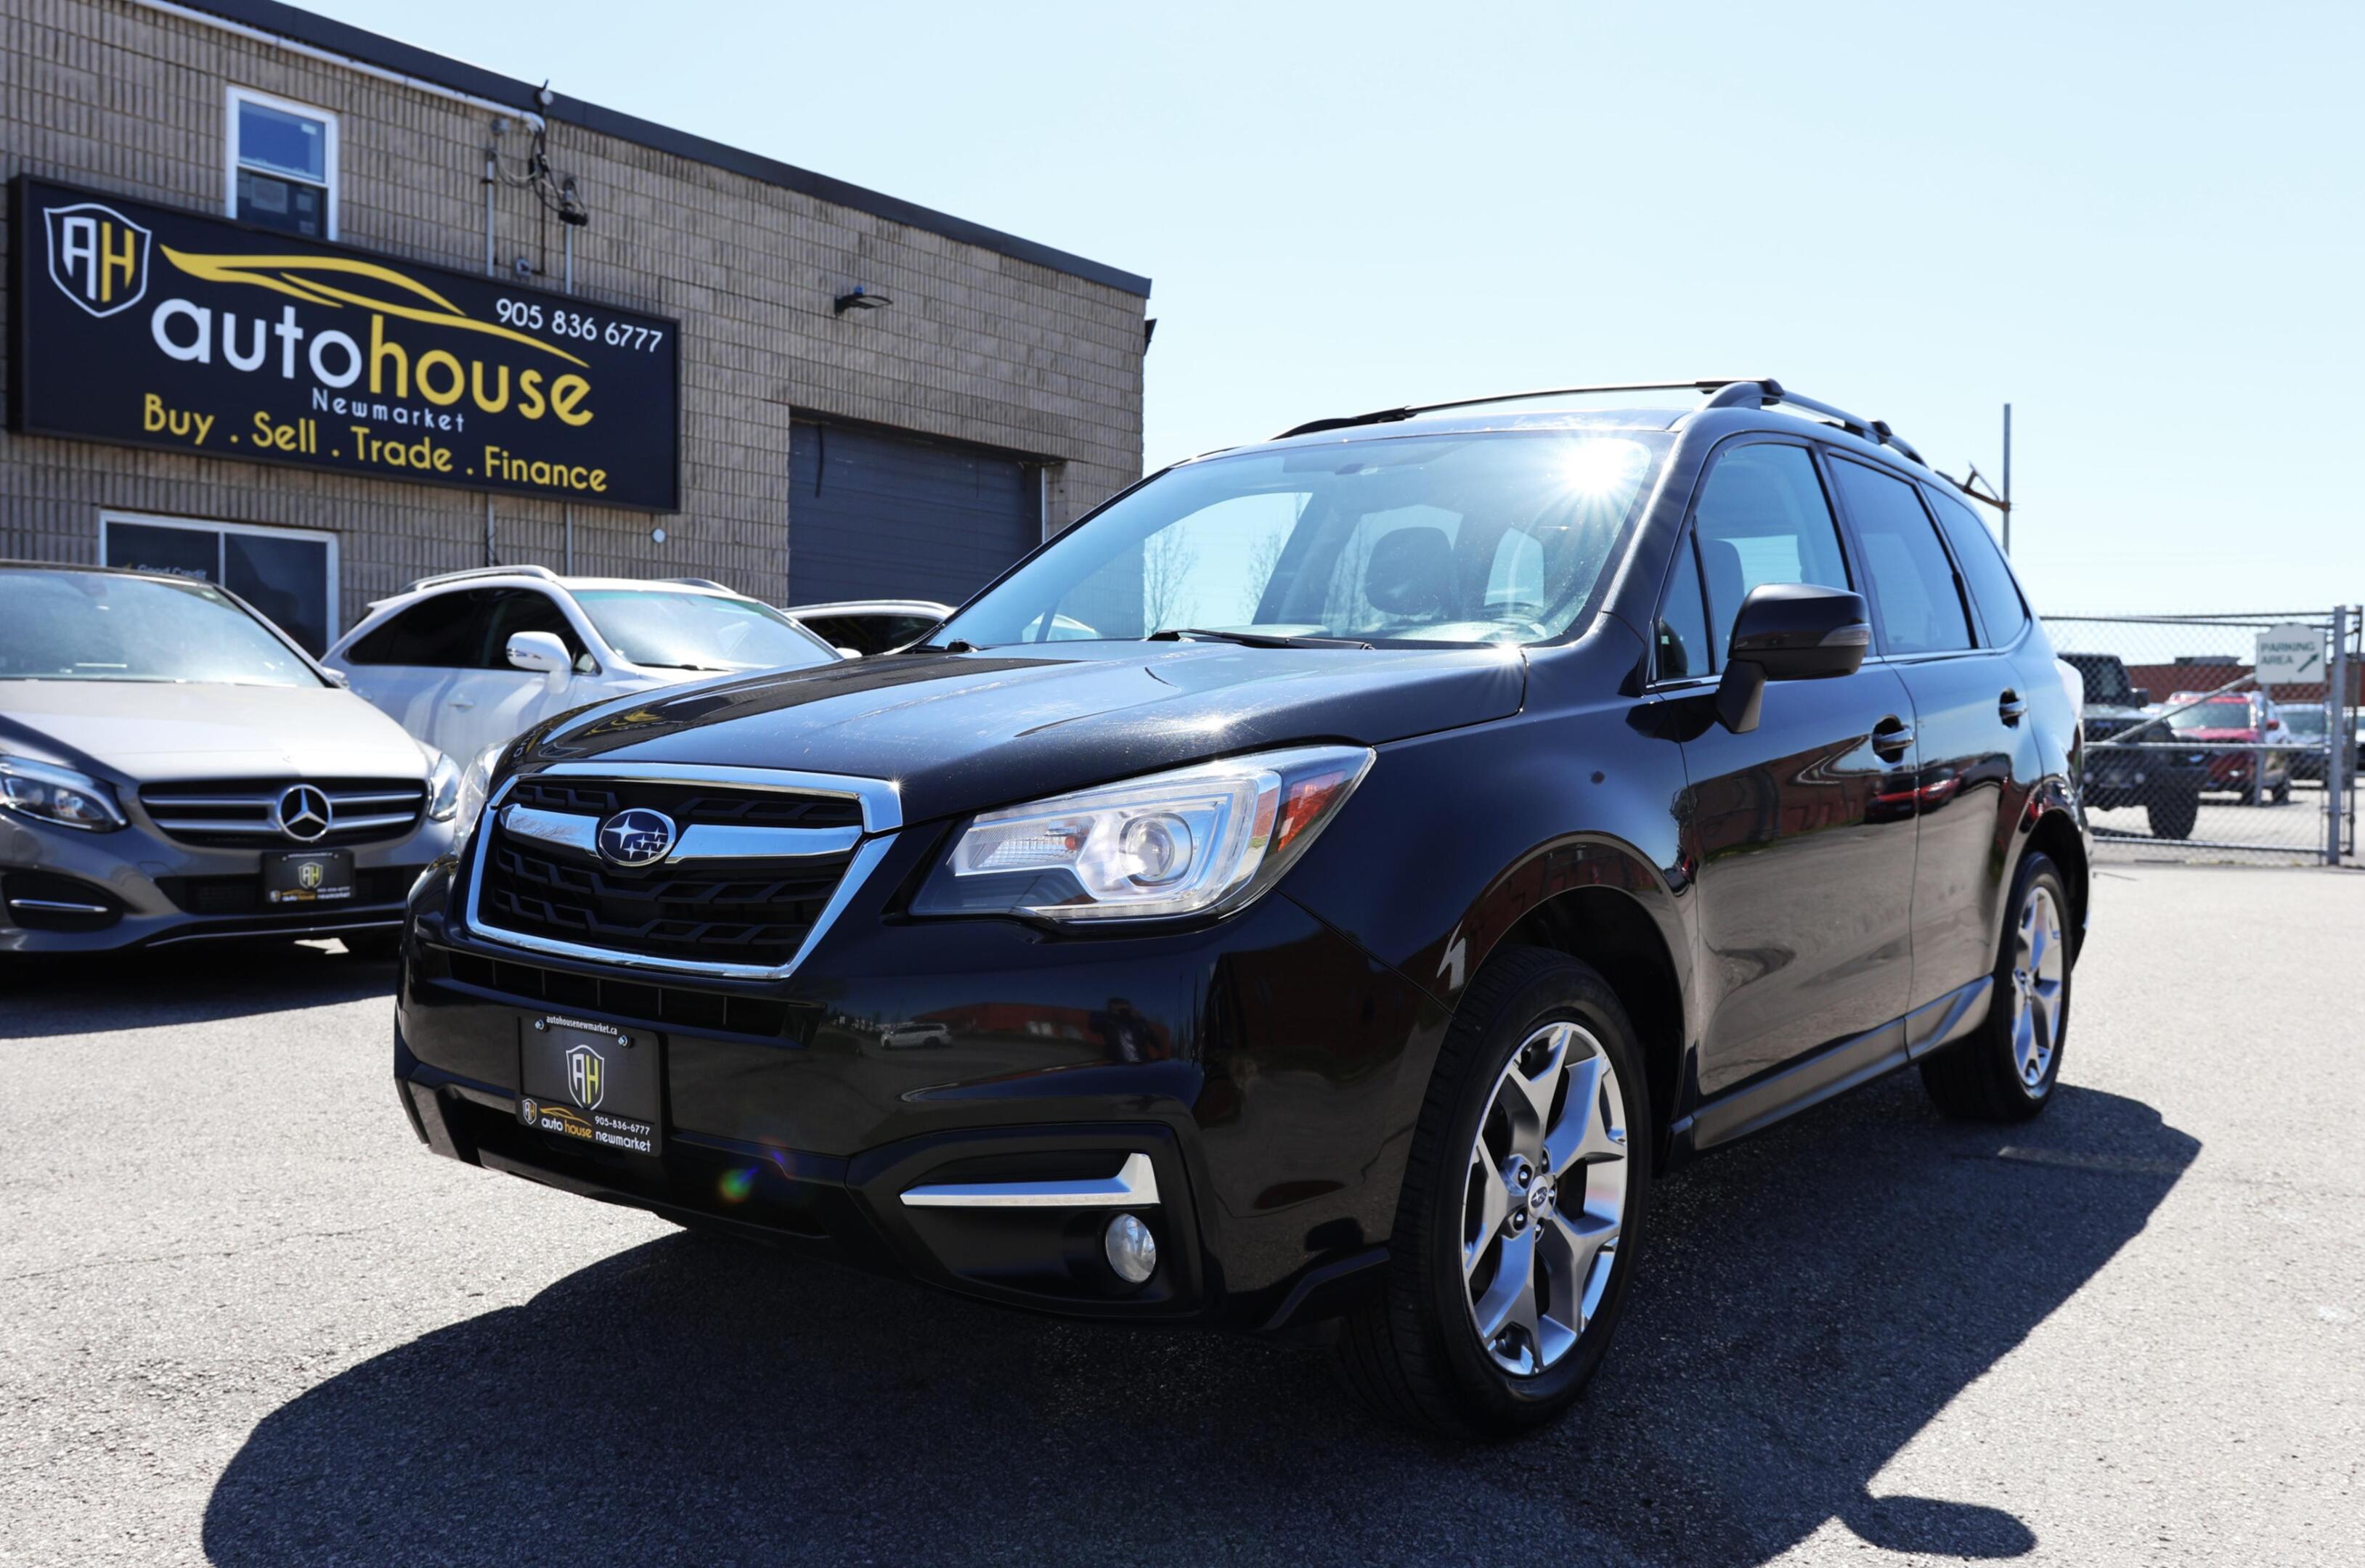 2017 Subaru Forester LIMITED-AWD/NAV/LEATHER/P SEAT/B CAM/PANOROOF/BLIS